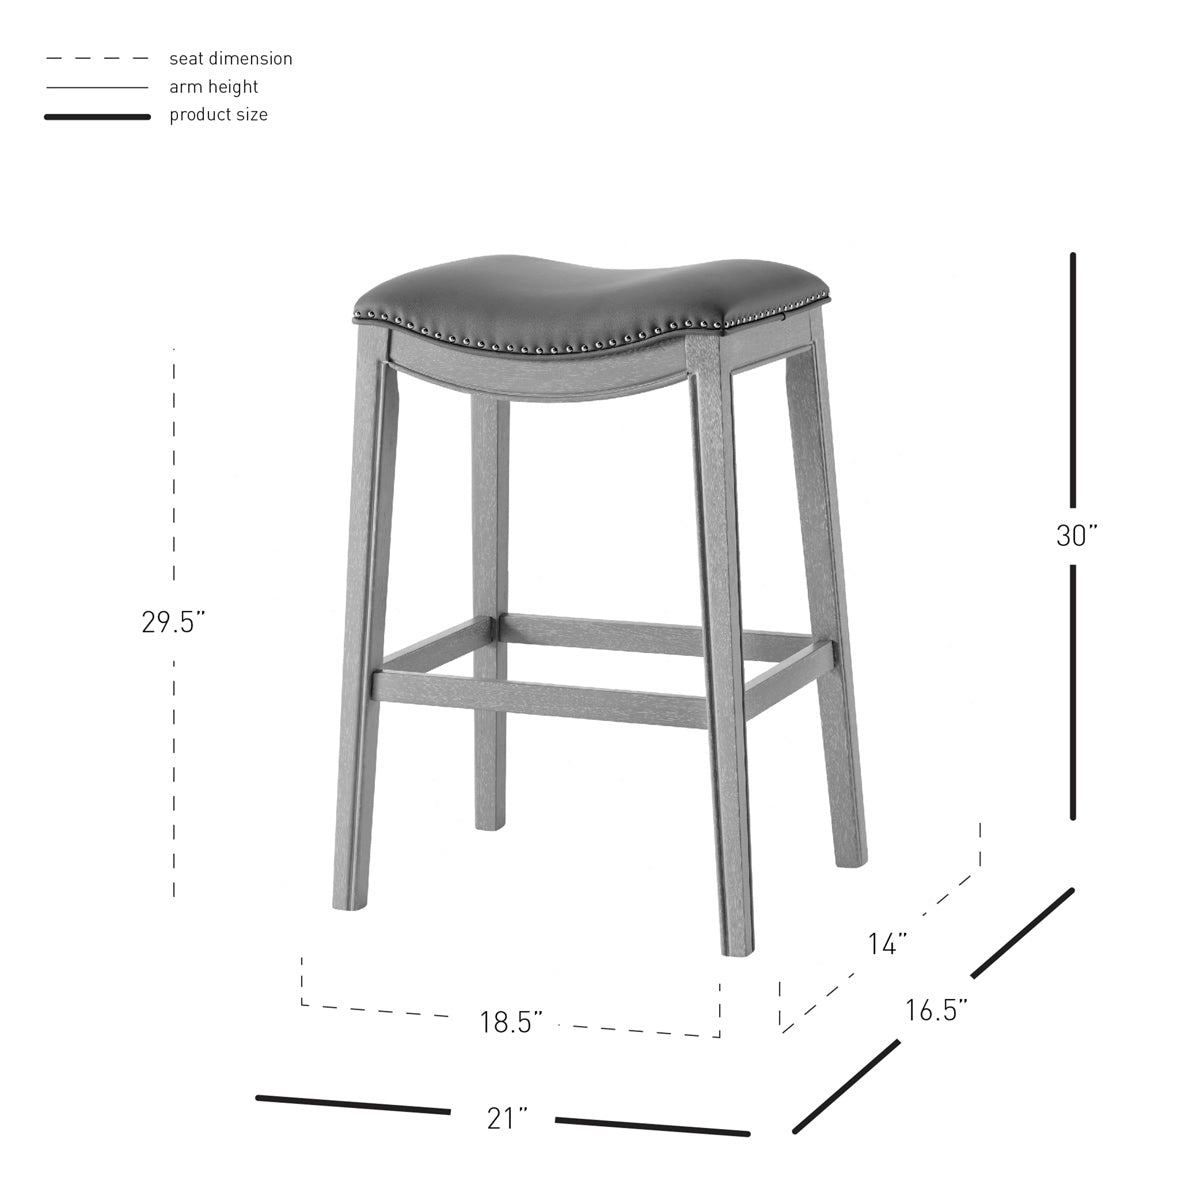 Grover PU Leather Bar Stool by New Pacific Direct - 1330003-385